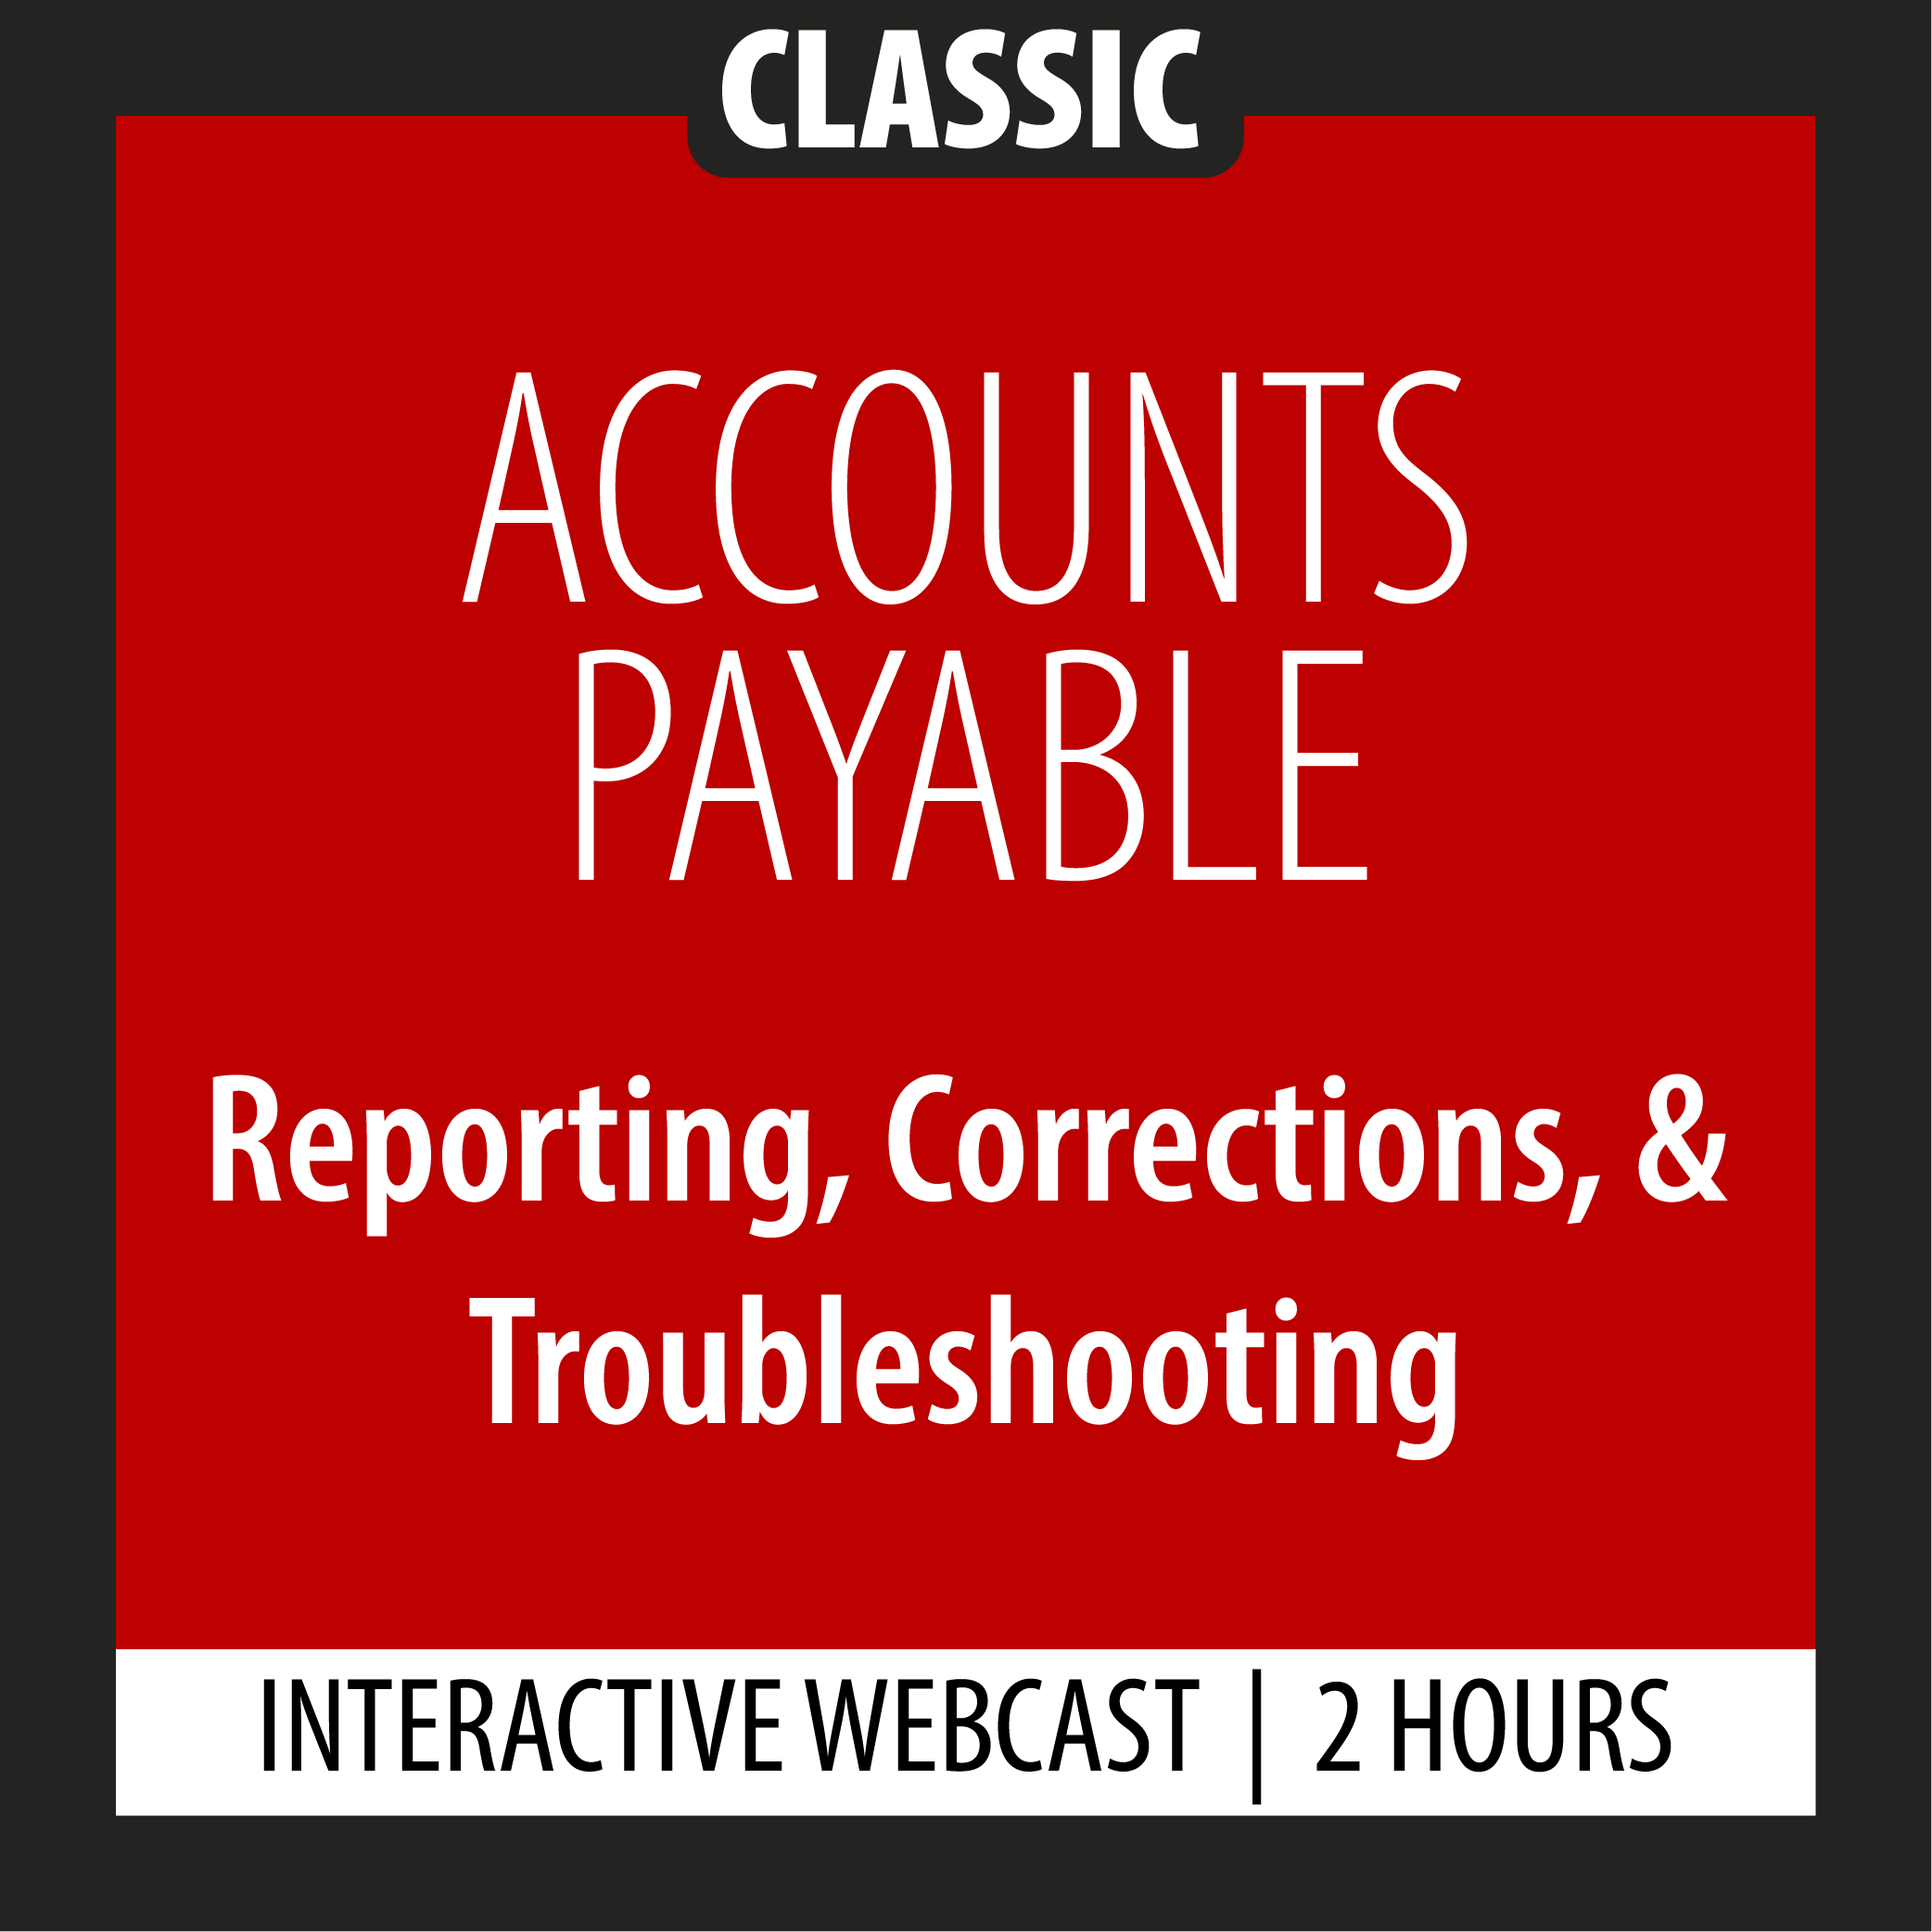 Classic - Accounts Payable - Reporting, Corrections, & Troubleshooting - Webcast - 2 Hours